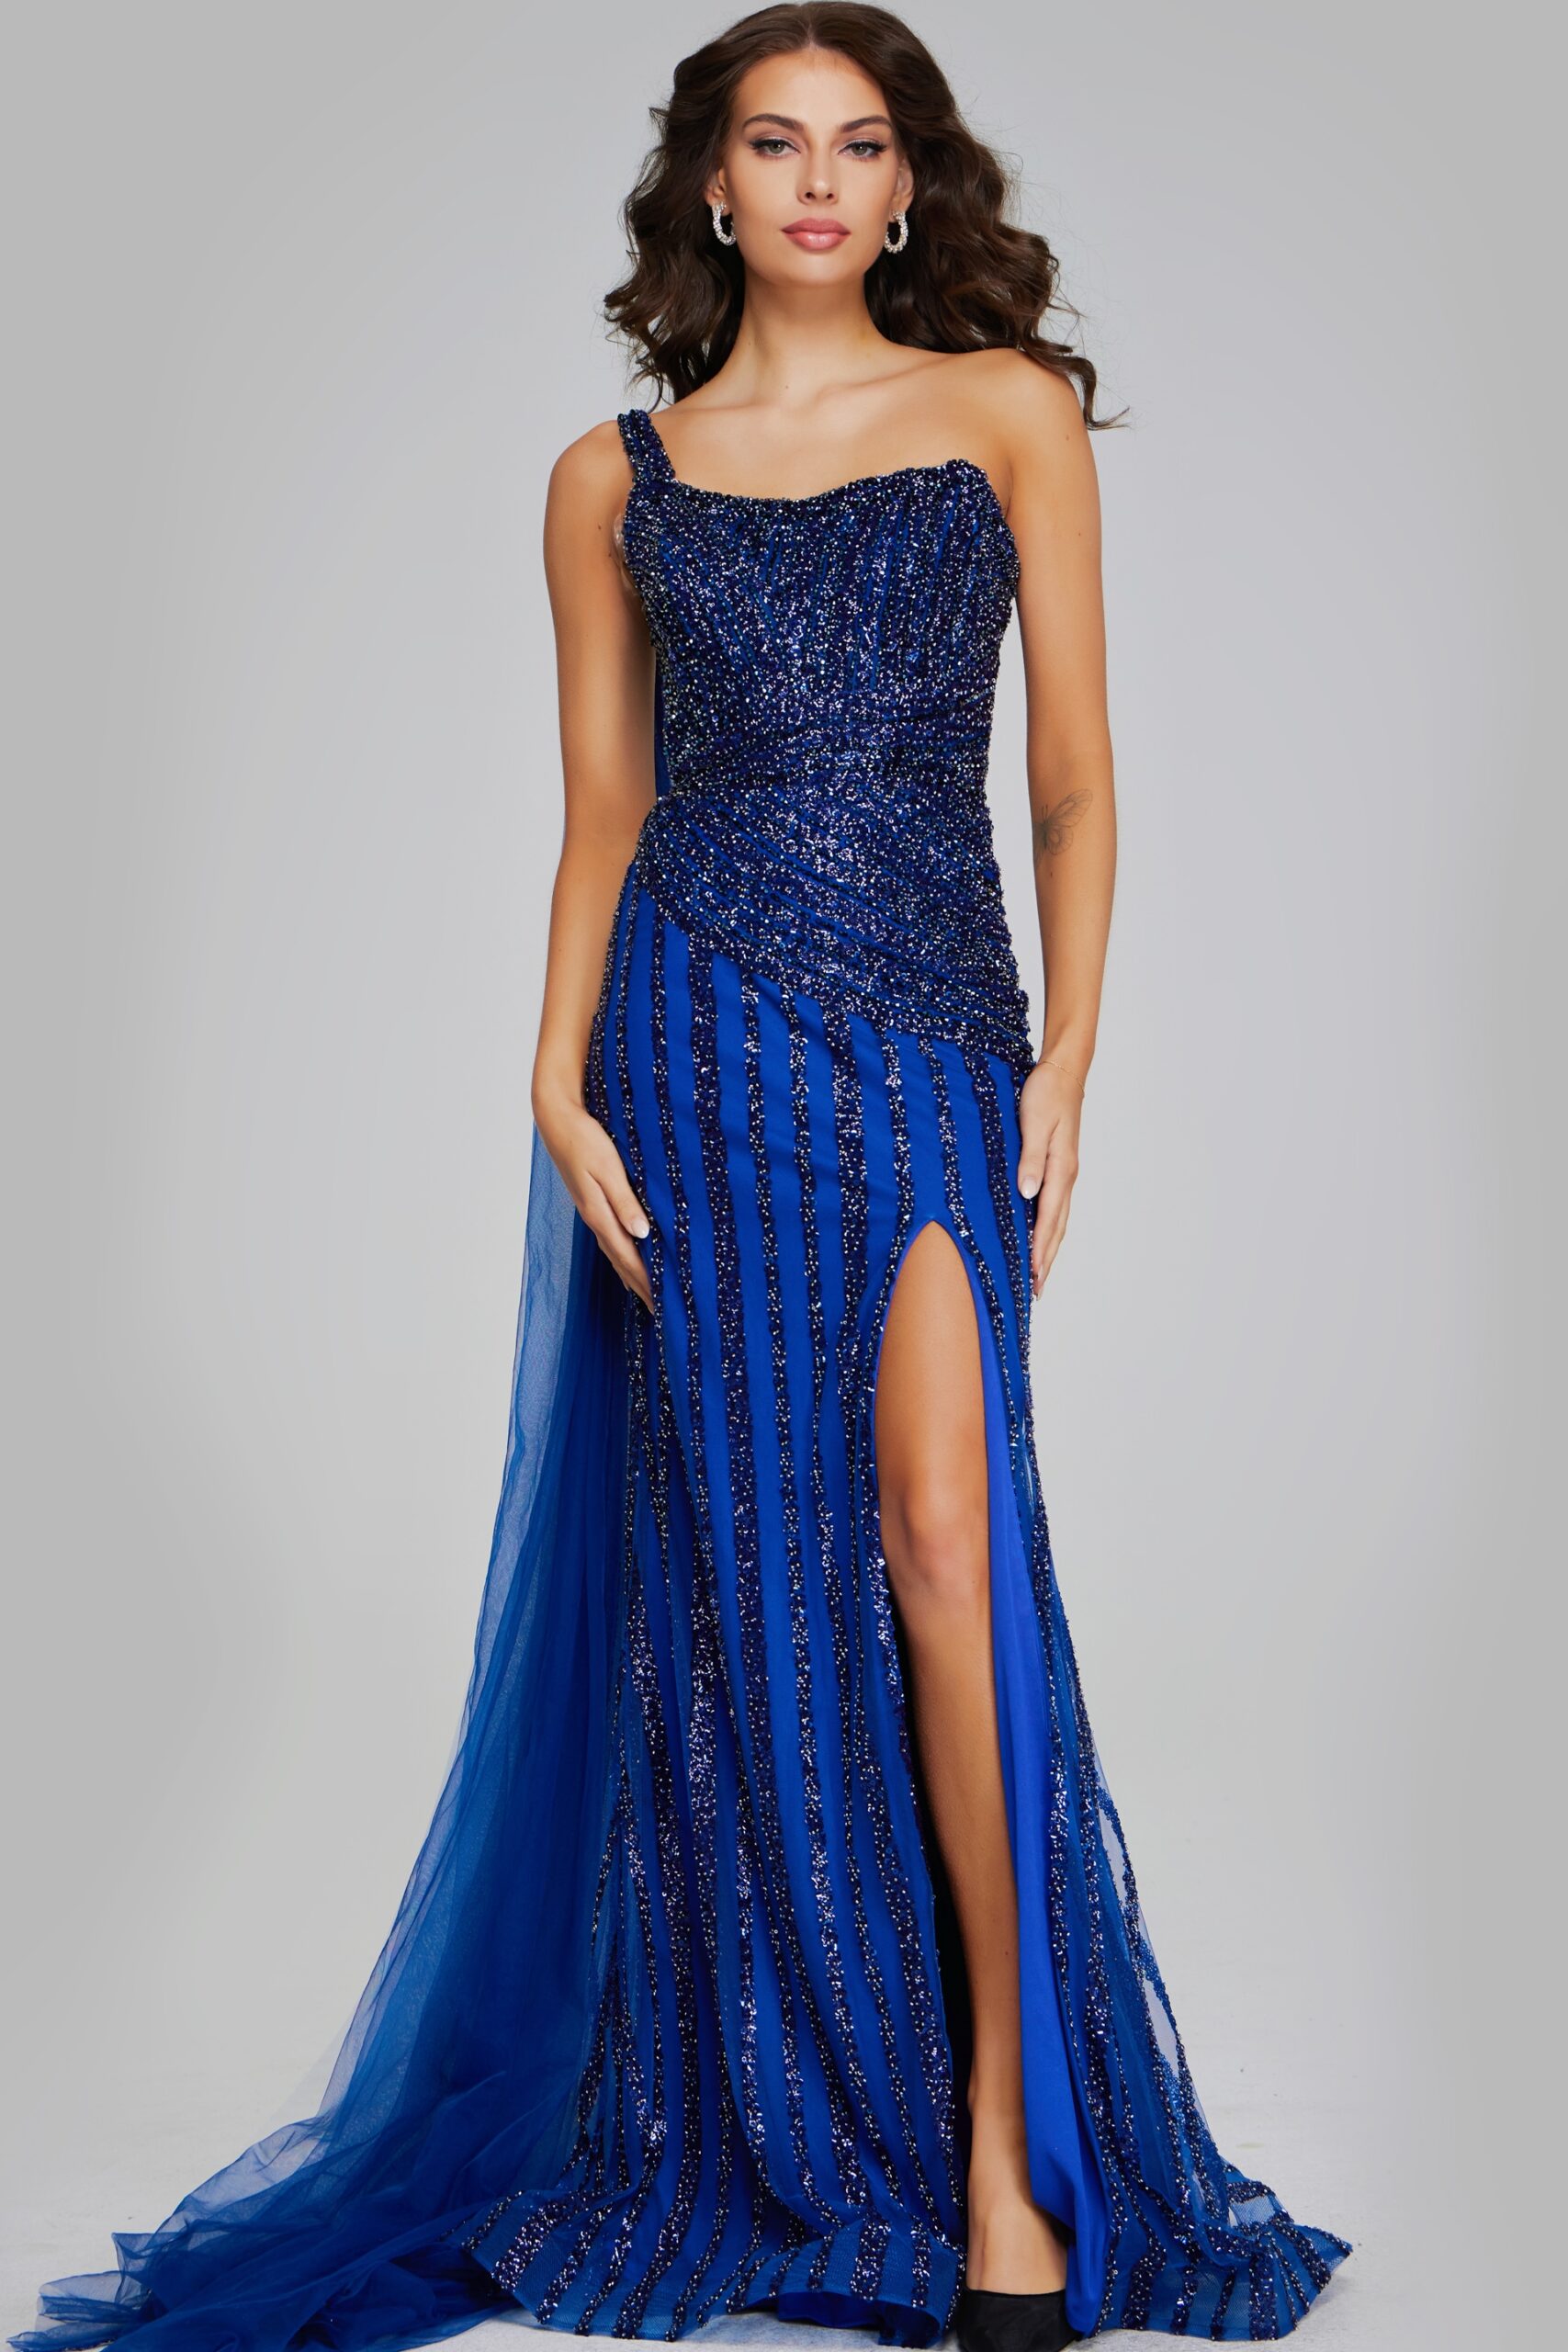 Model wearing One-Shoulder Navy Gown with Beaded Details and Slit 39386